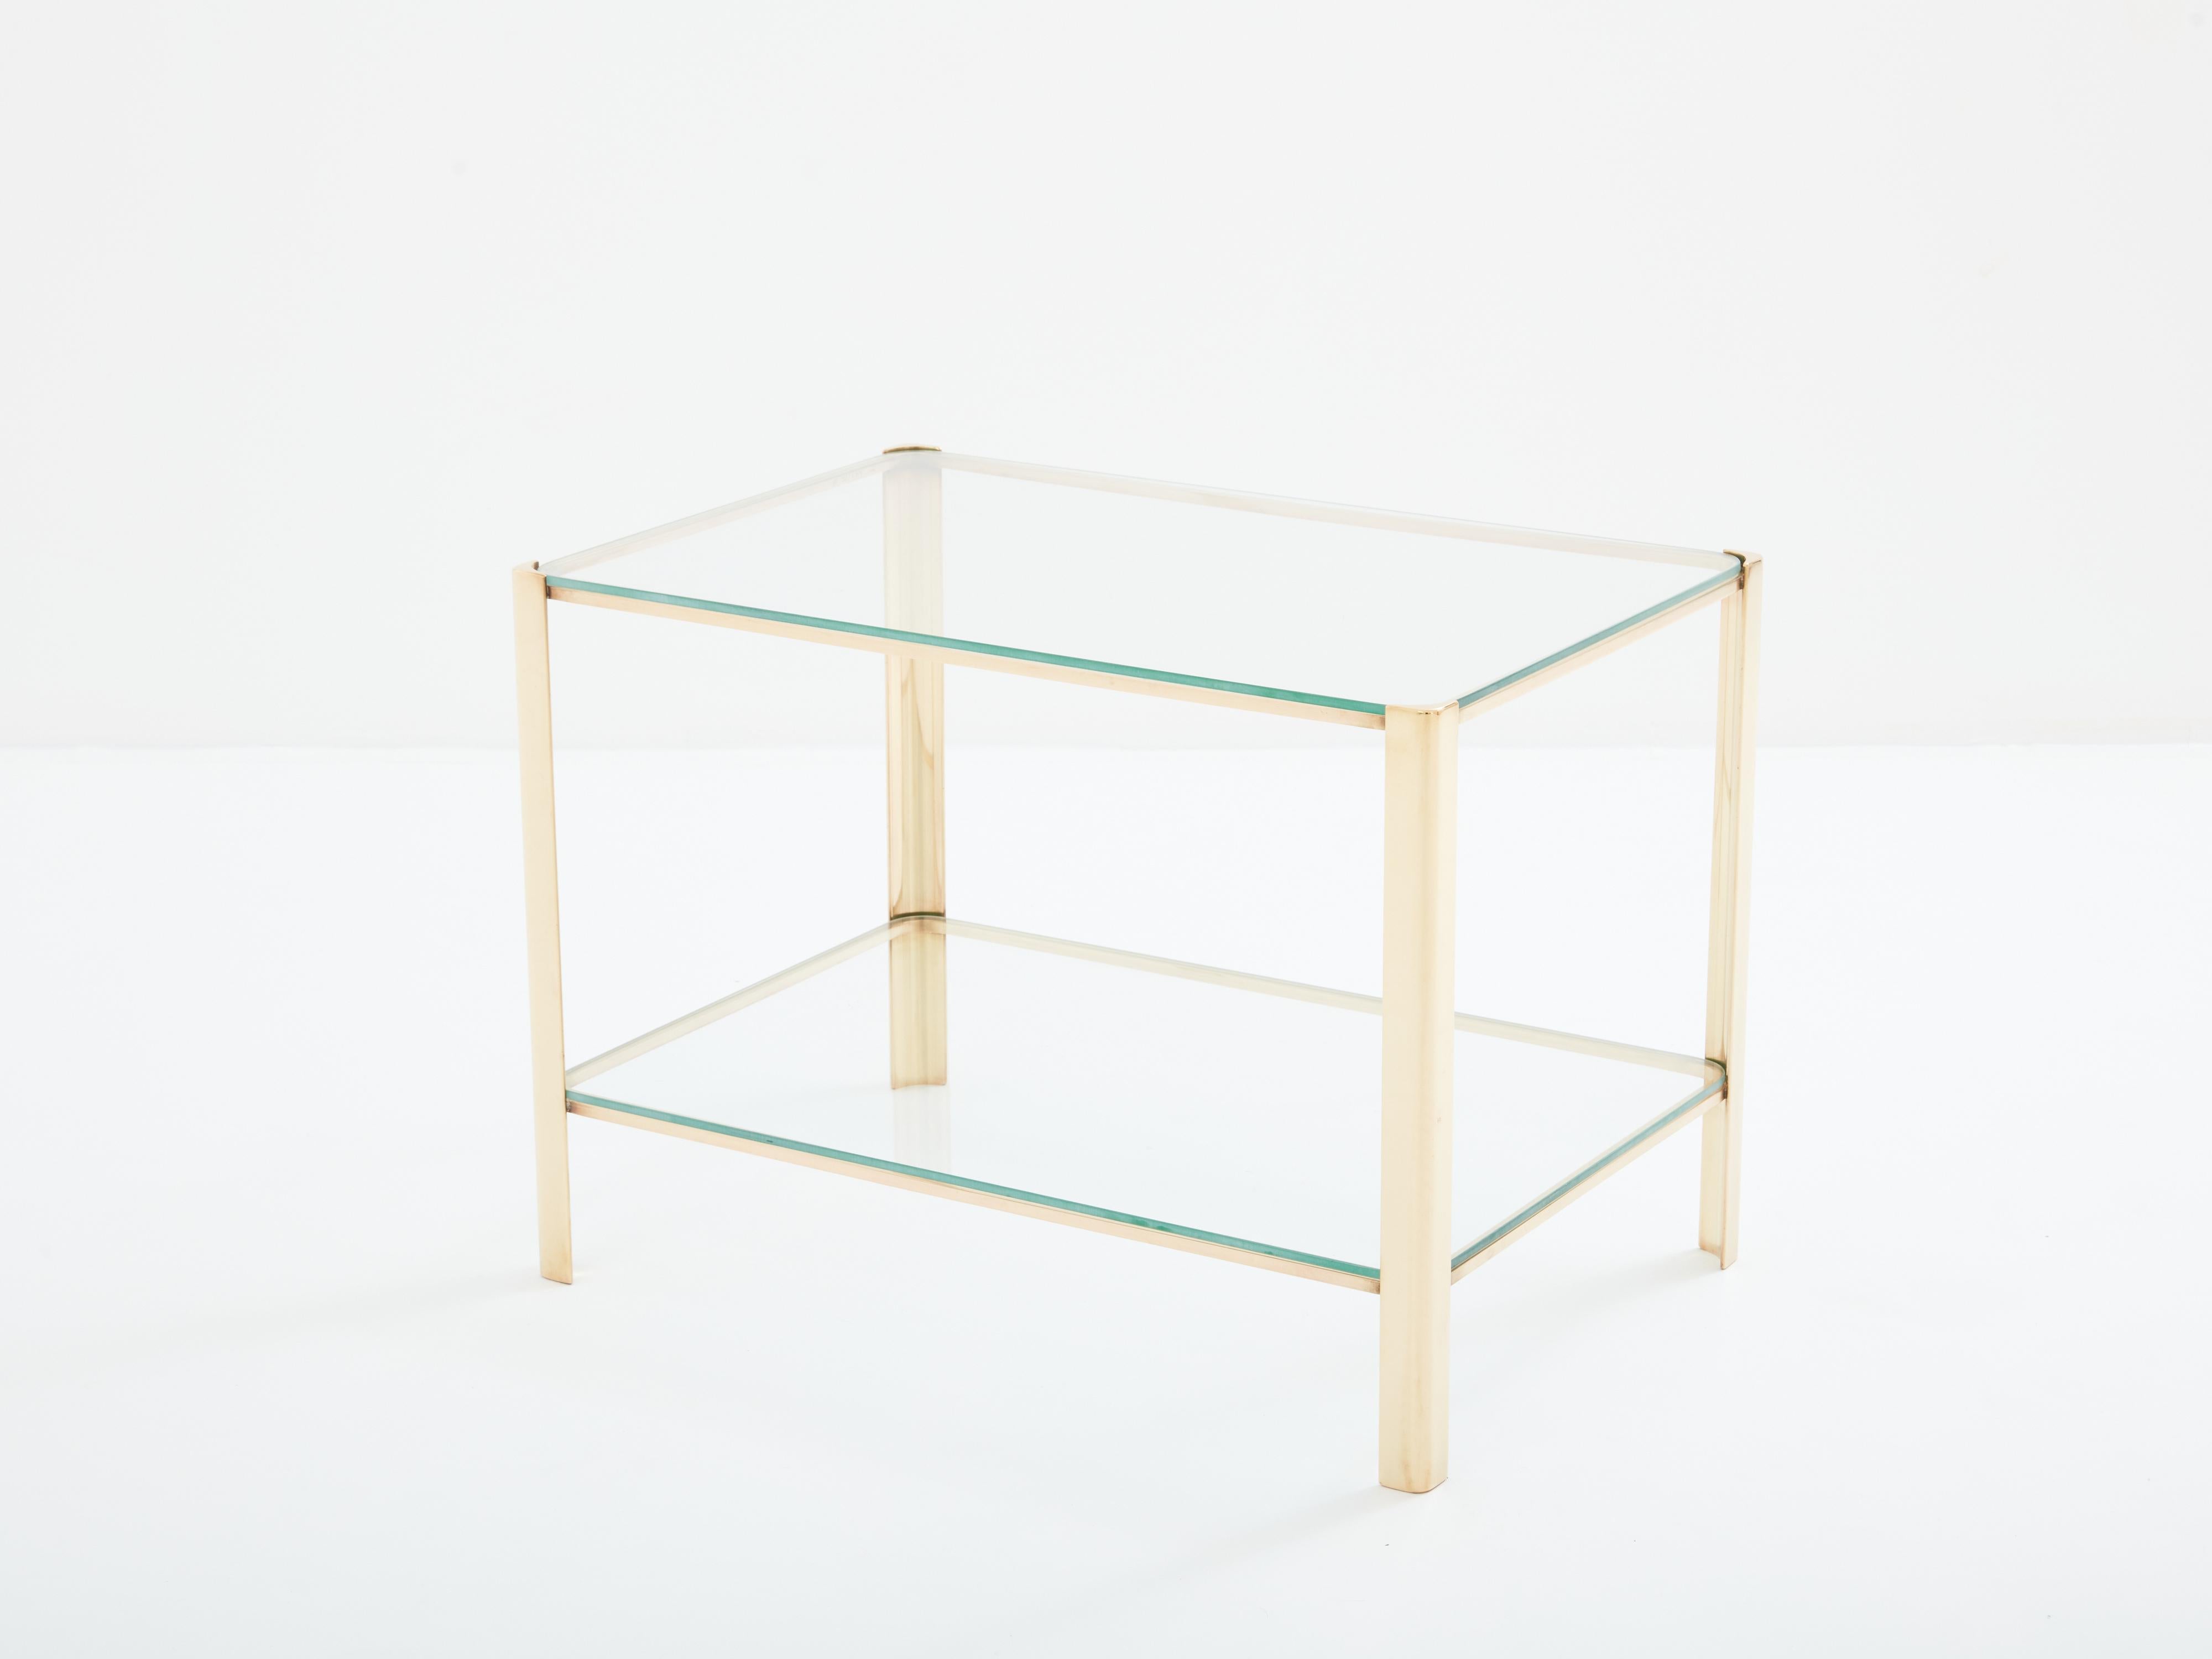 This beautiful two-tier side table was designed by Jacques Quinet and produced by Broncz in France in the 1960s. This side table features a strong, solid polished bronze structure built to last forever. The two original transparent glass tops add a